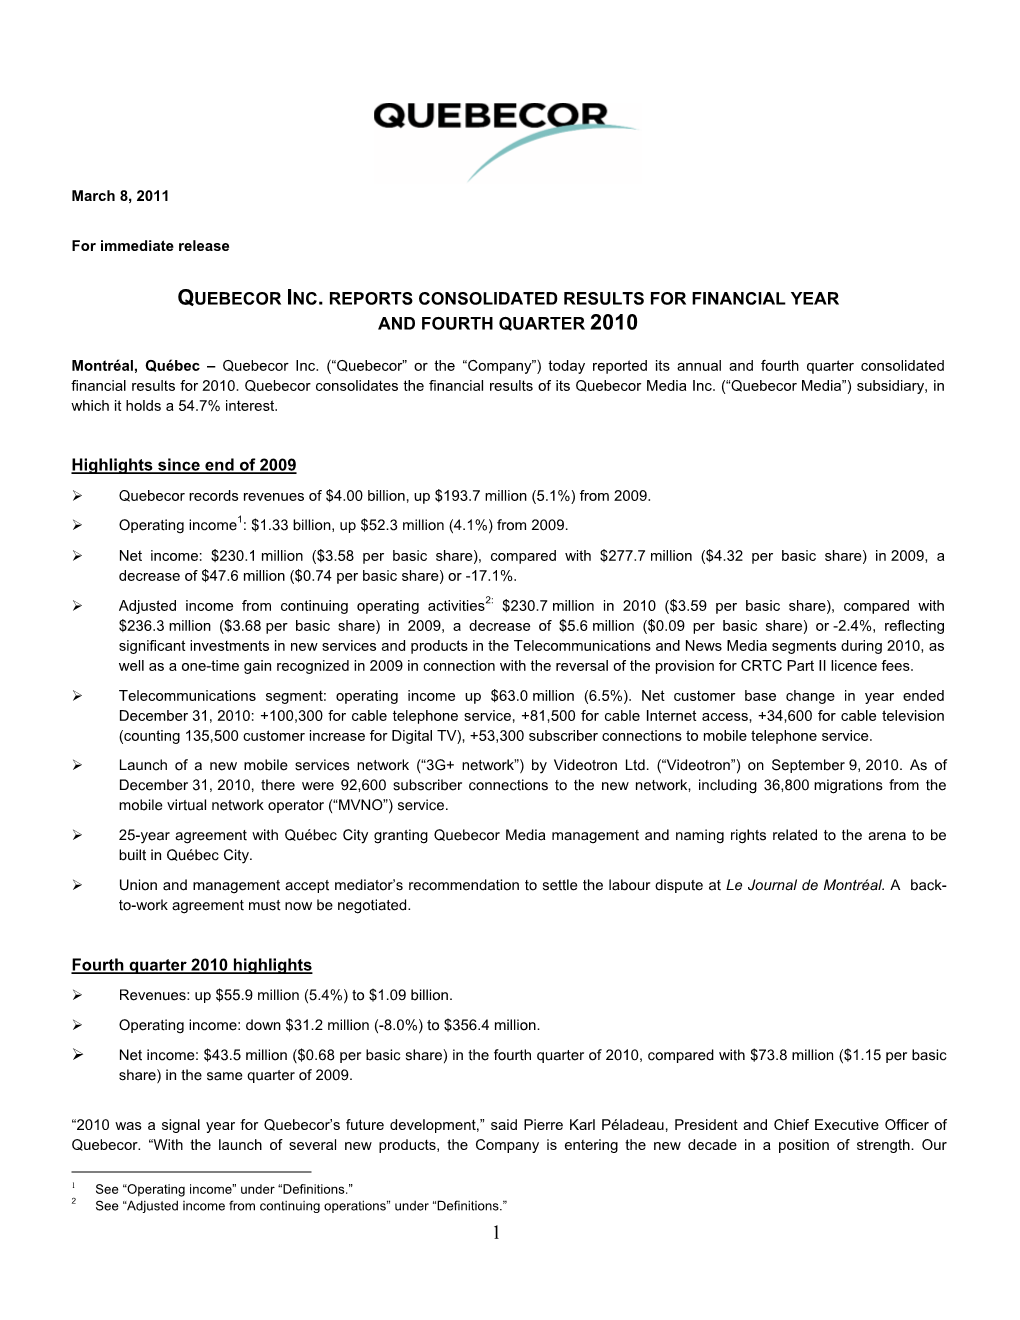 QUEBECOR INC. REPORTS CONSOLIDATED RESULTS for FINANCIAL YEAR and FOURTH QUARTER 2010 Highlights Since End of 2009 Fourth Quarte